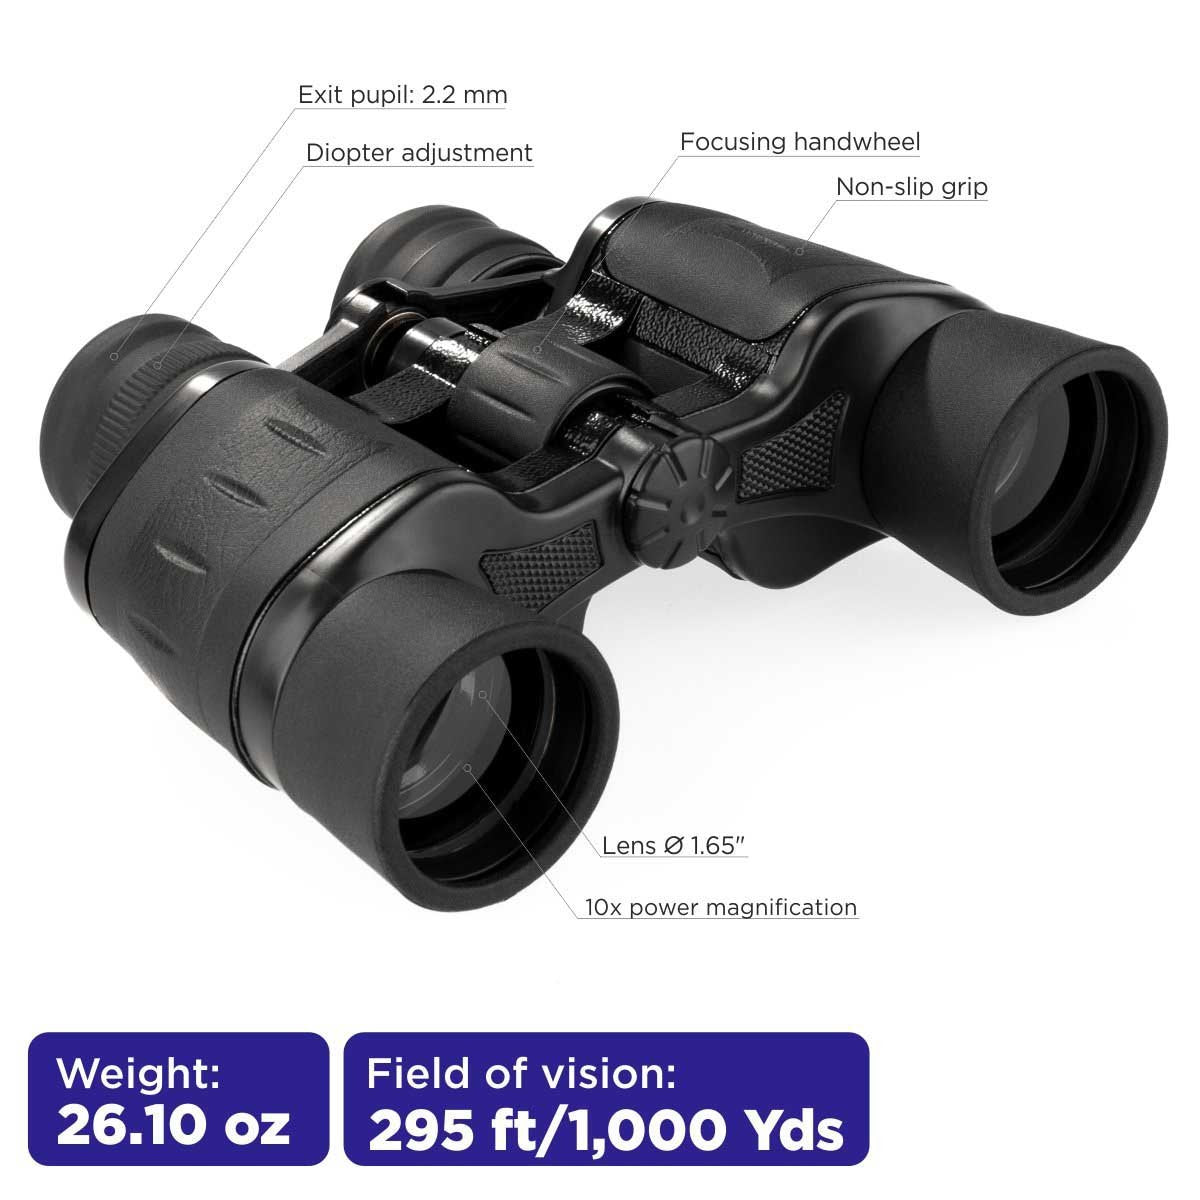 12x42 Black Large Binocular with a Carry Bag weighs 26 oz, stands for a thousand yard field of view, boast 1.65-inches lens, 10x magnification, diopter adjustment and a focusing handwheel